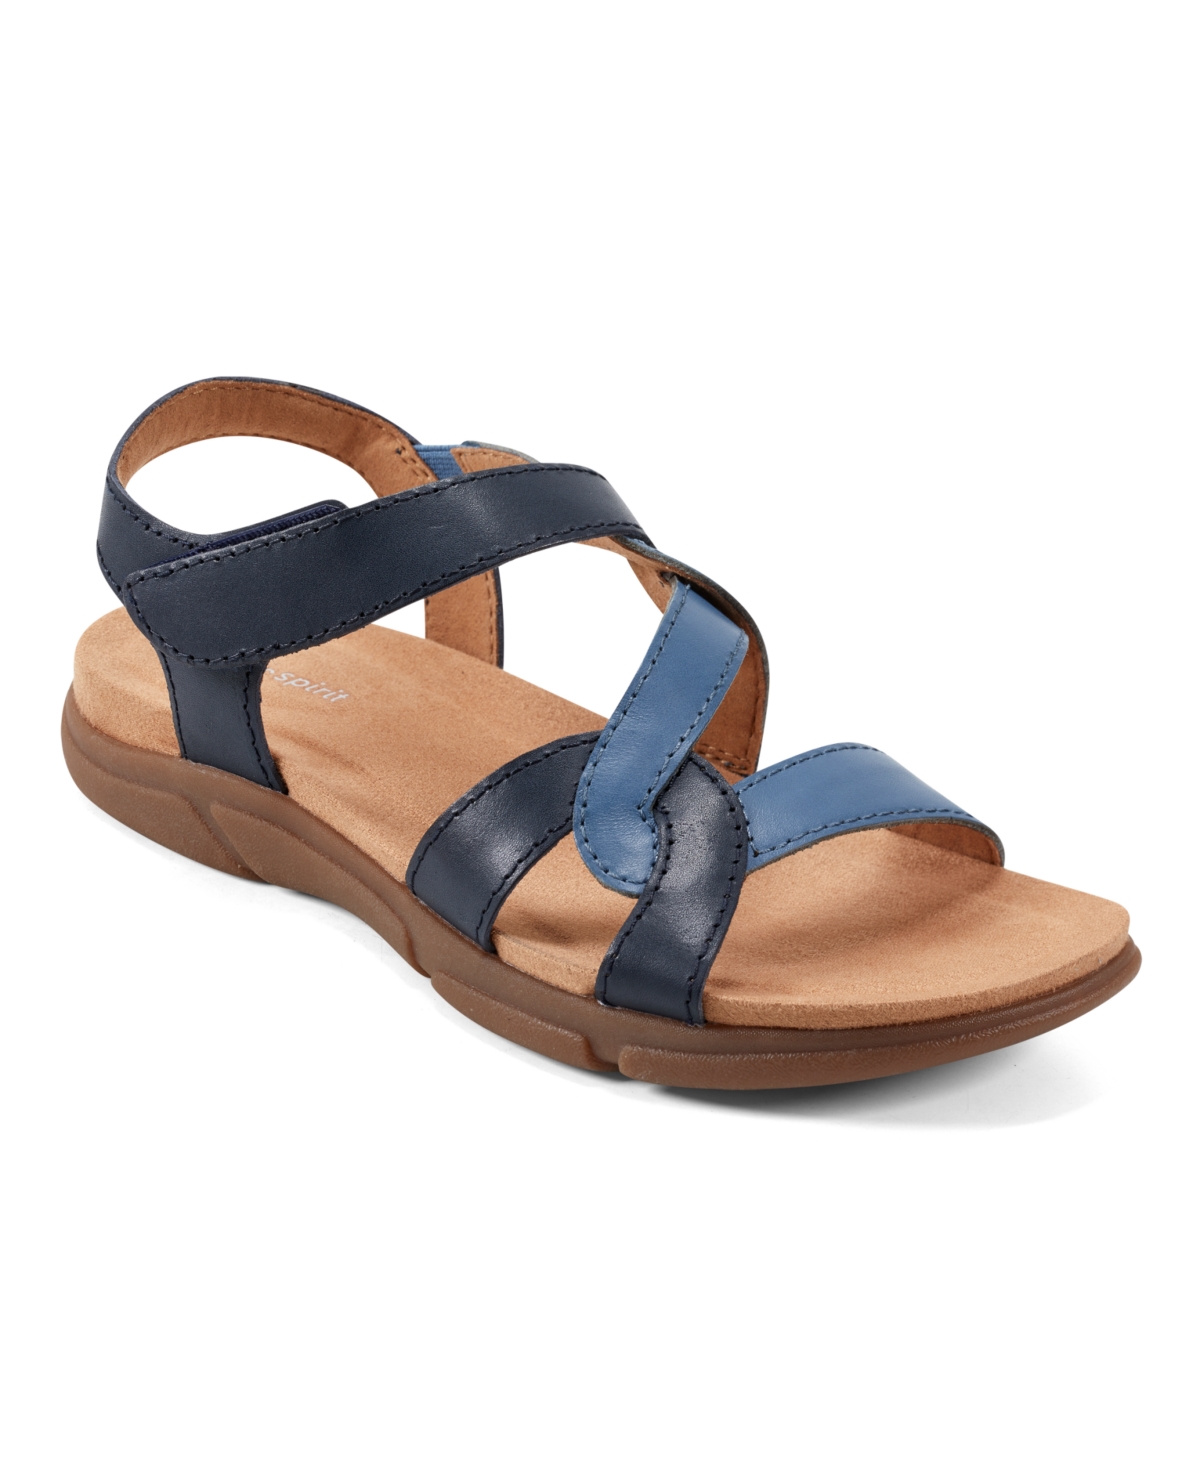 Easy Spirit Women's Minny Round Toe Casual Flat Sandals In Navy Multi Leather